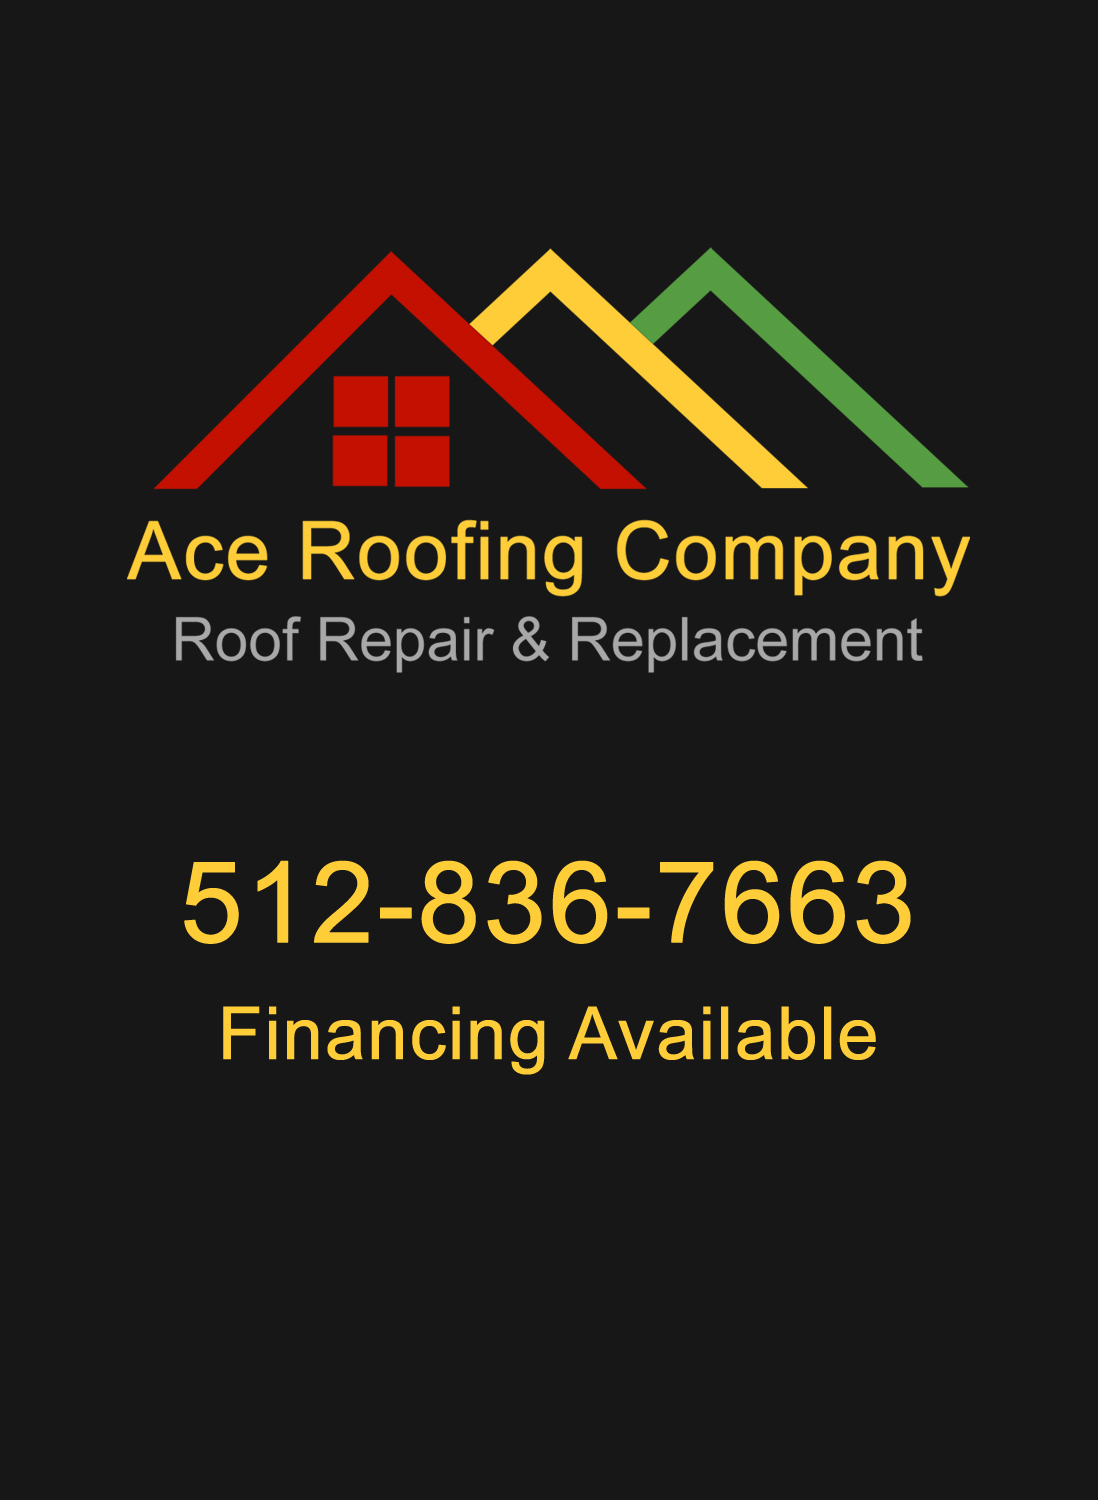 Ace Roofing Company Announces Its Expanded Residential Roofing Services